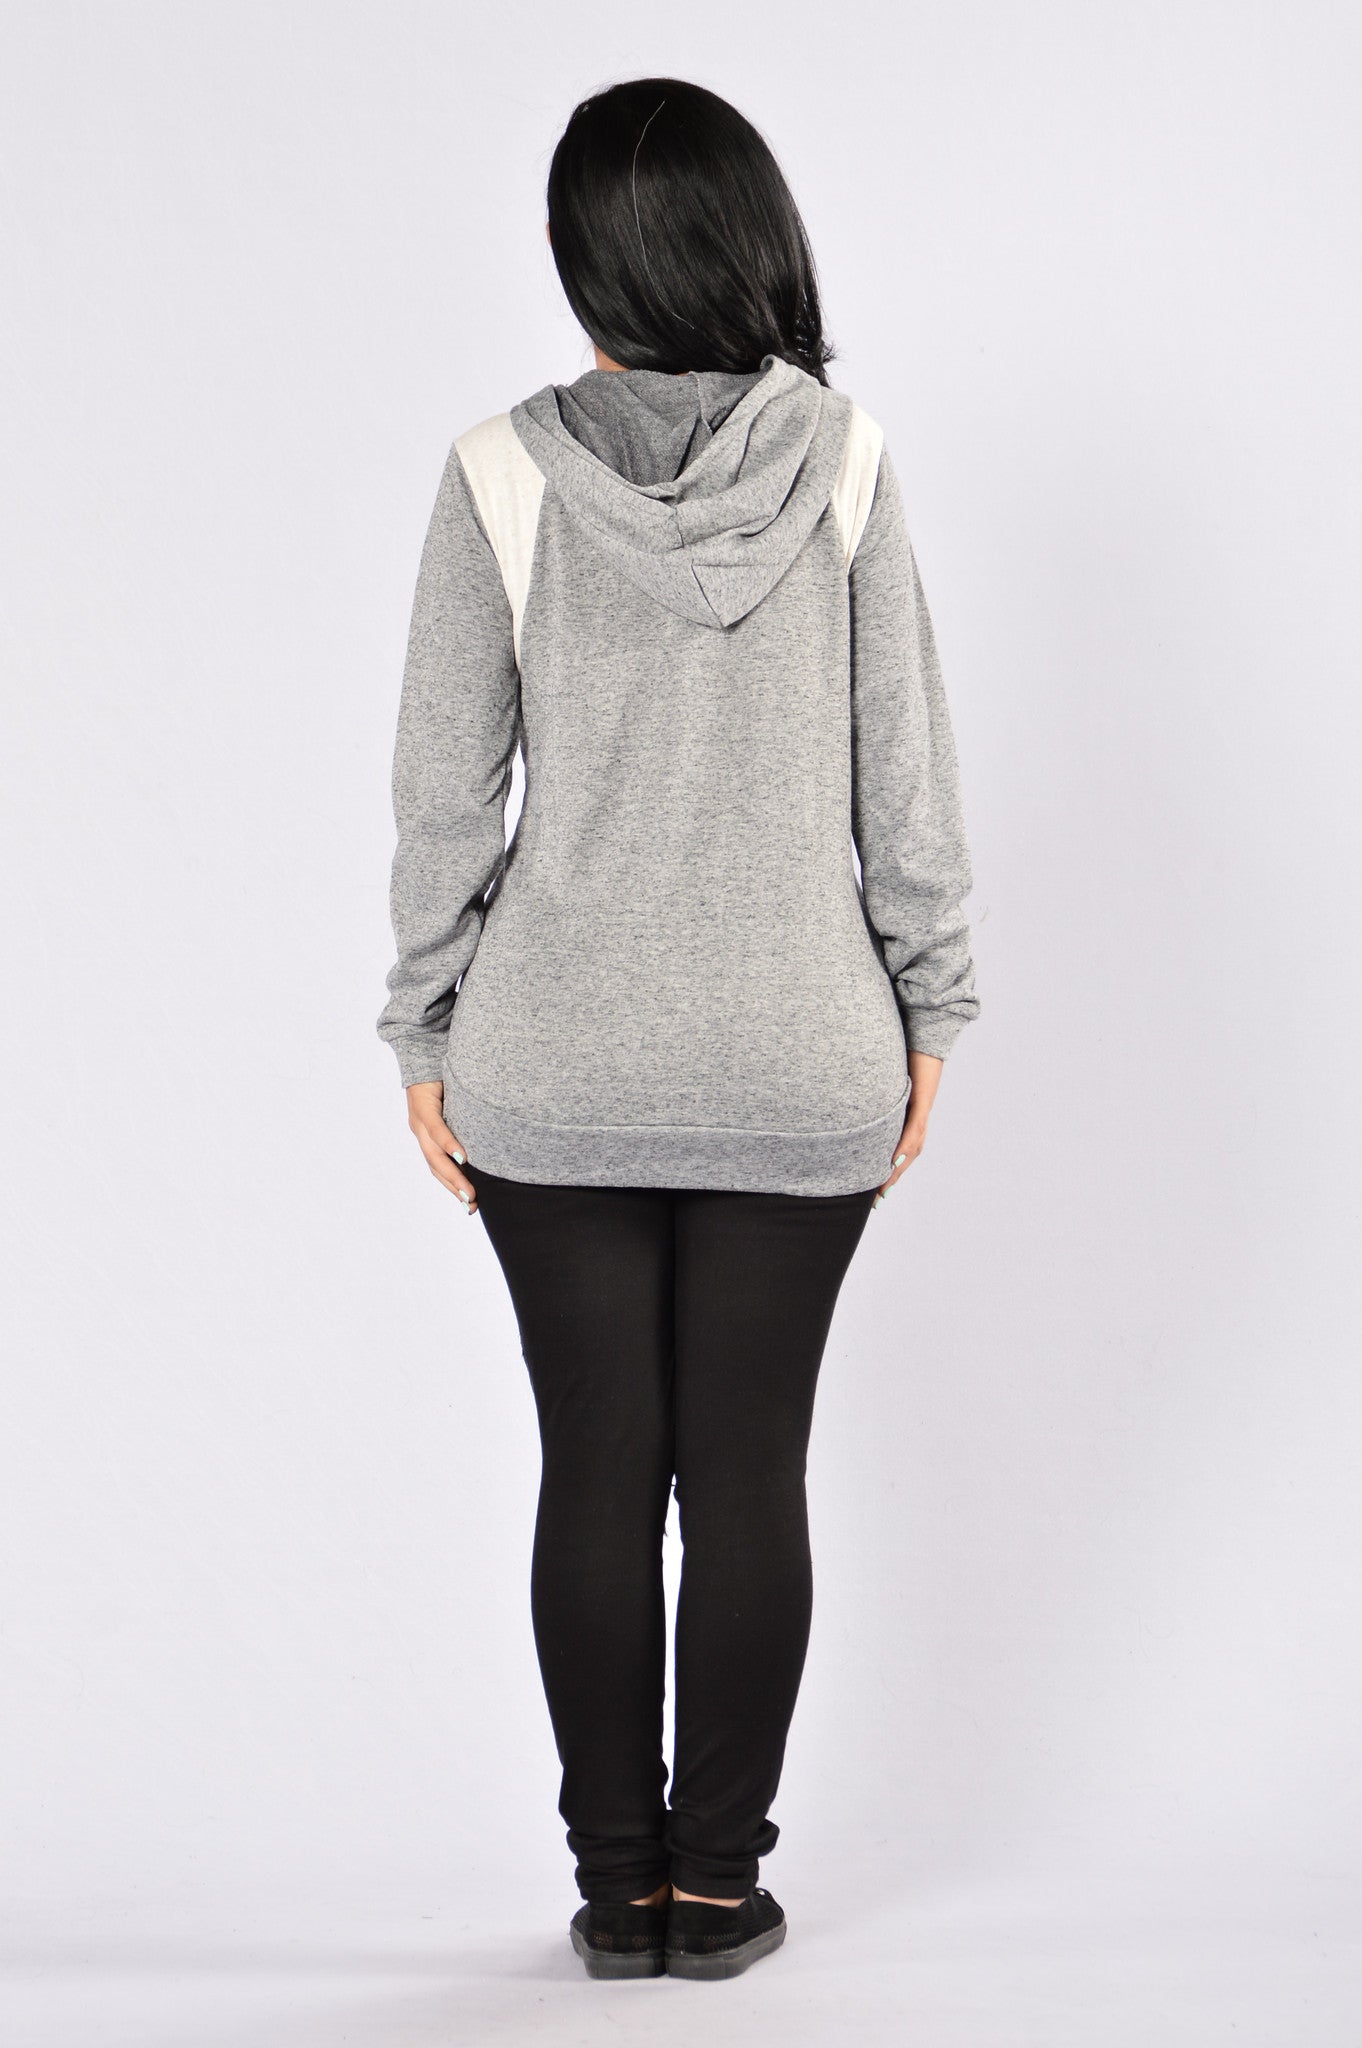 Cool and Comfy Sweater - Black